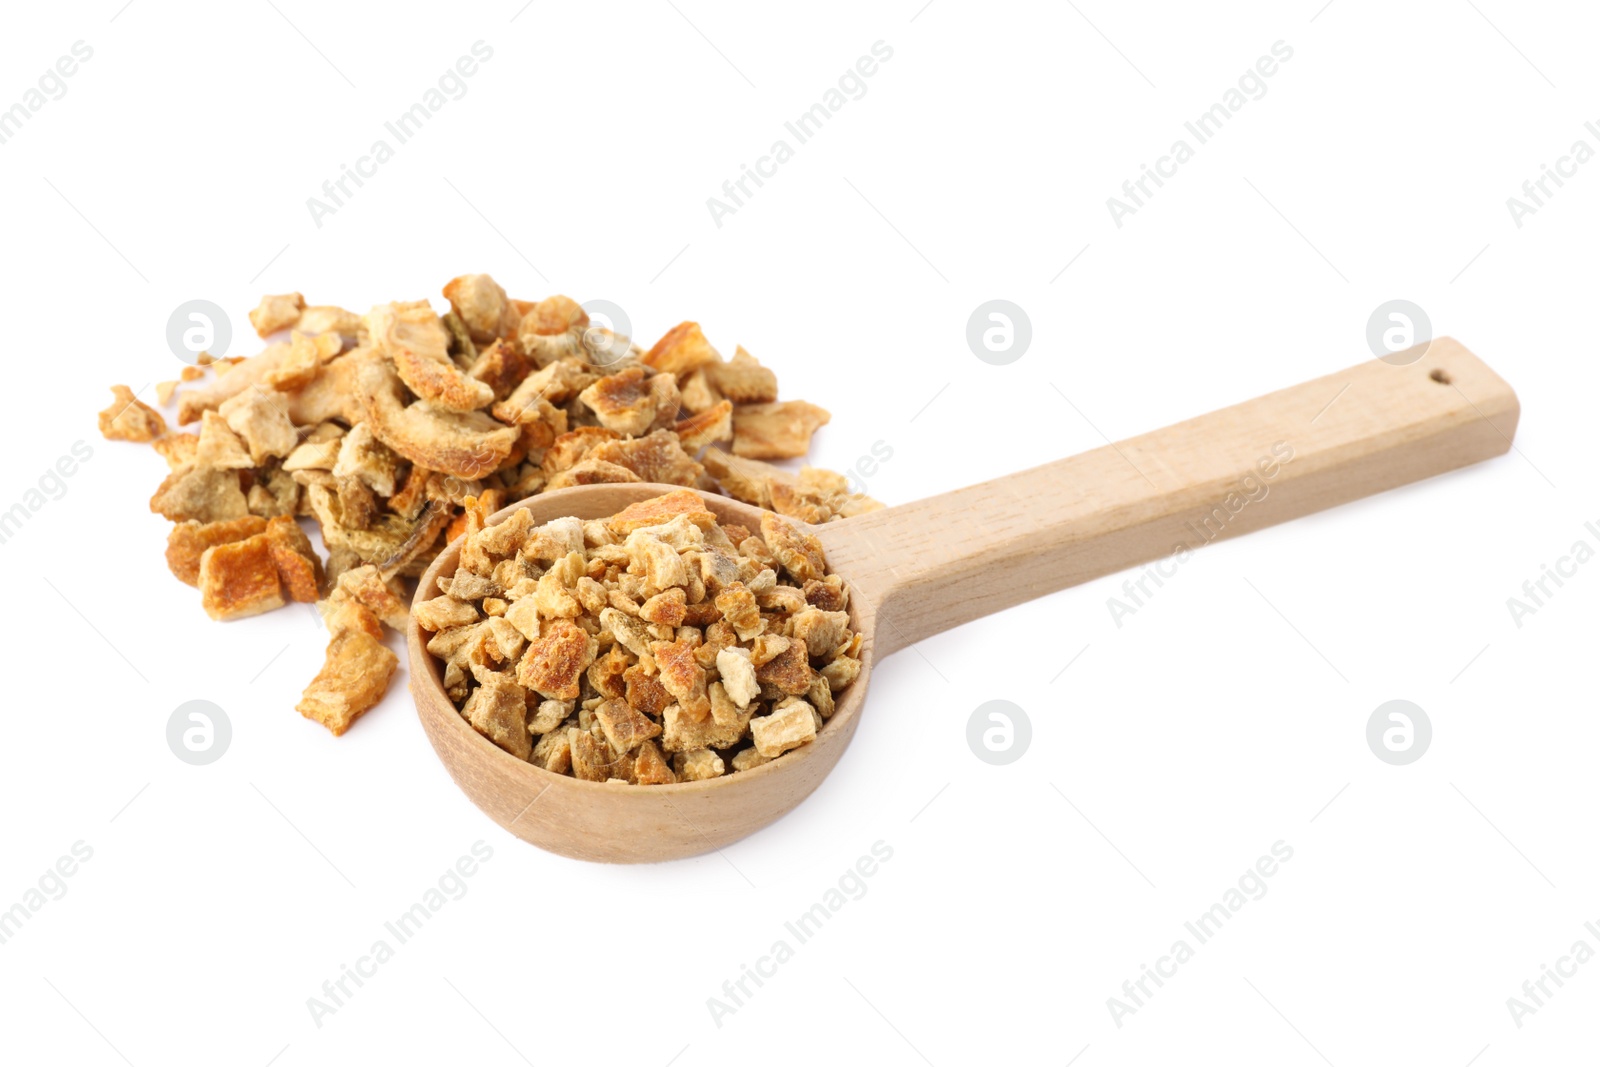 Photo of Spoon with dried orange zest seasoning isolated on white